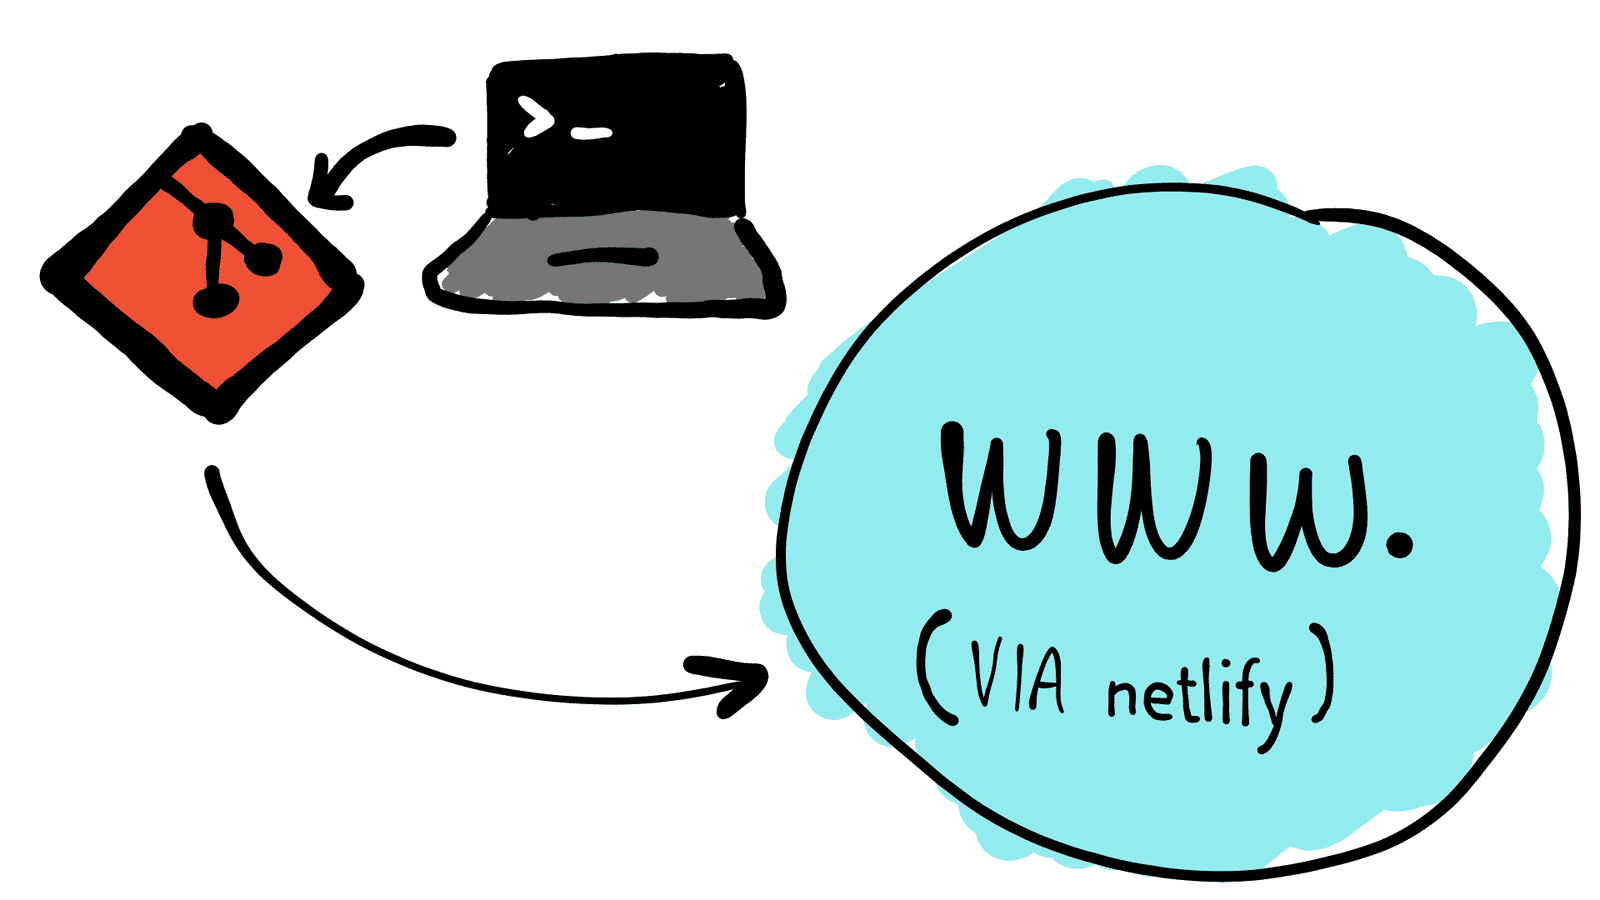 Diagram depicting a computer, to git, to the internet via Netlify